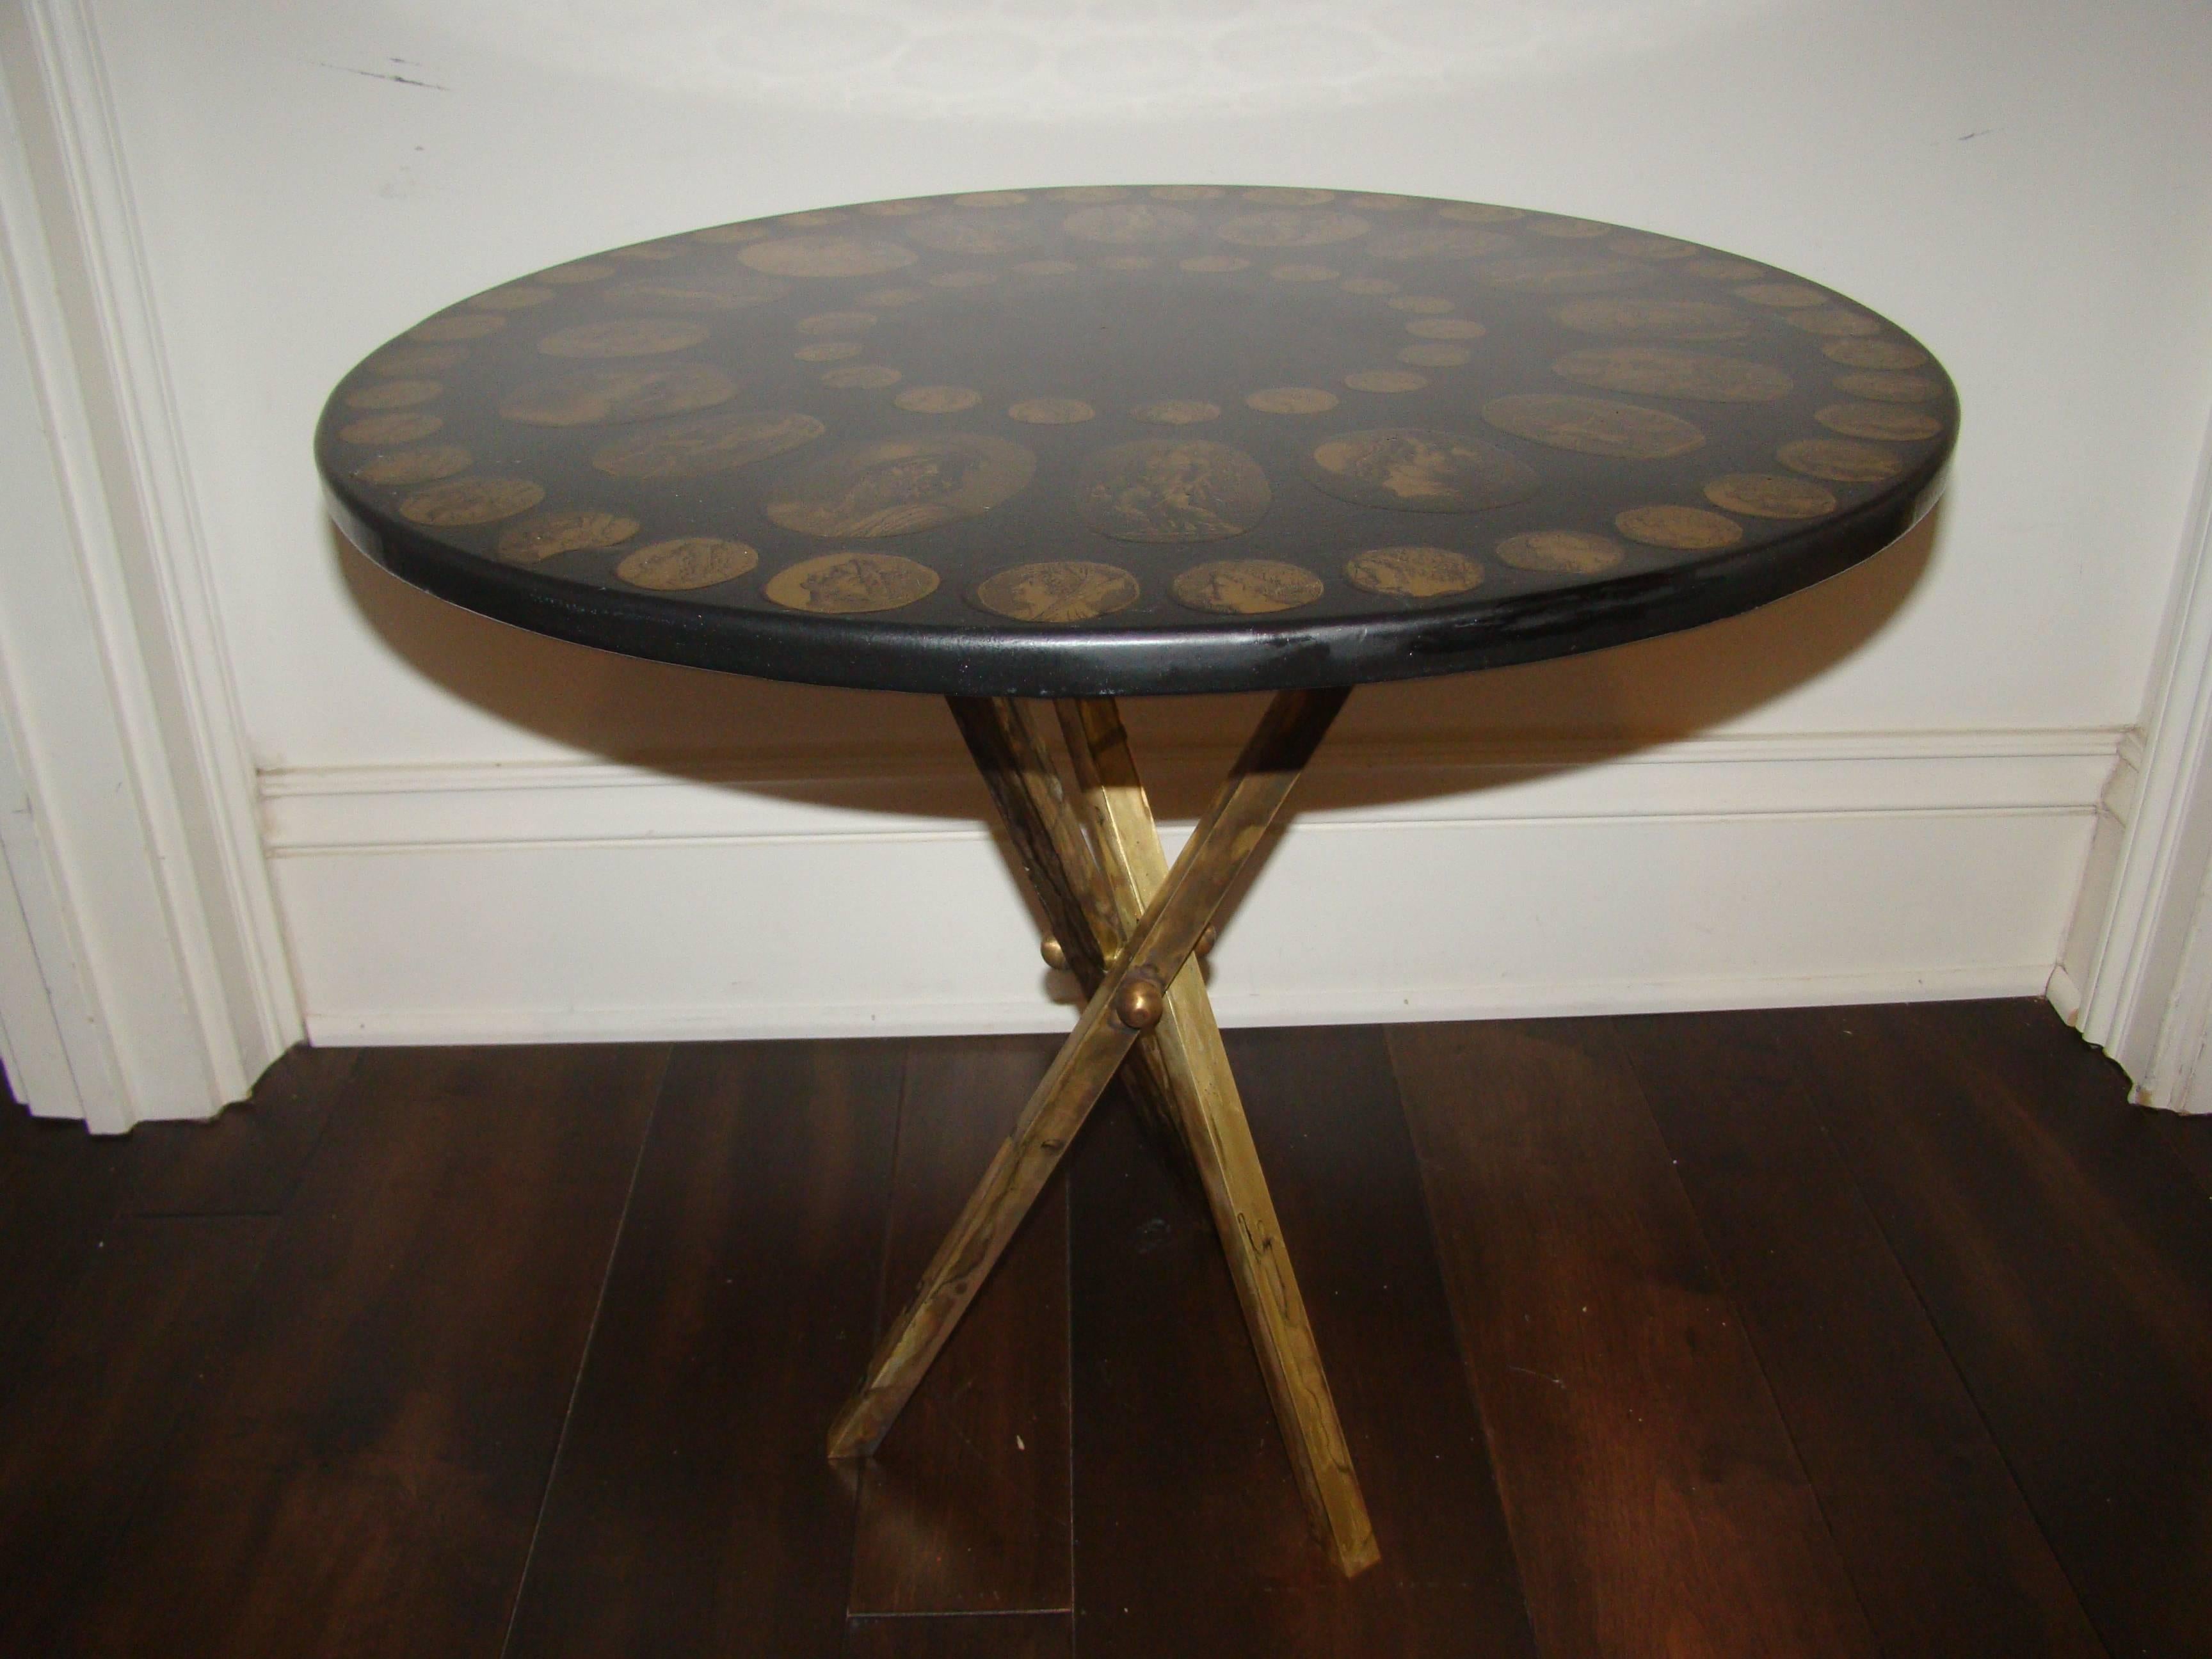 Terrific signed Fornasetti sculptural tripod table. This great table features a brass tripod base with coin motif top. The brass shows signs of patina which may polish up. Truly a great table in person.